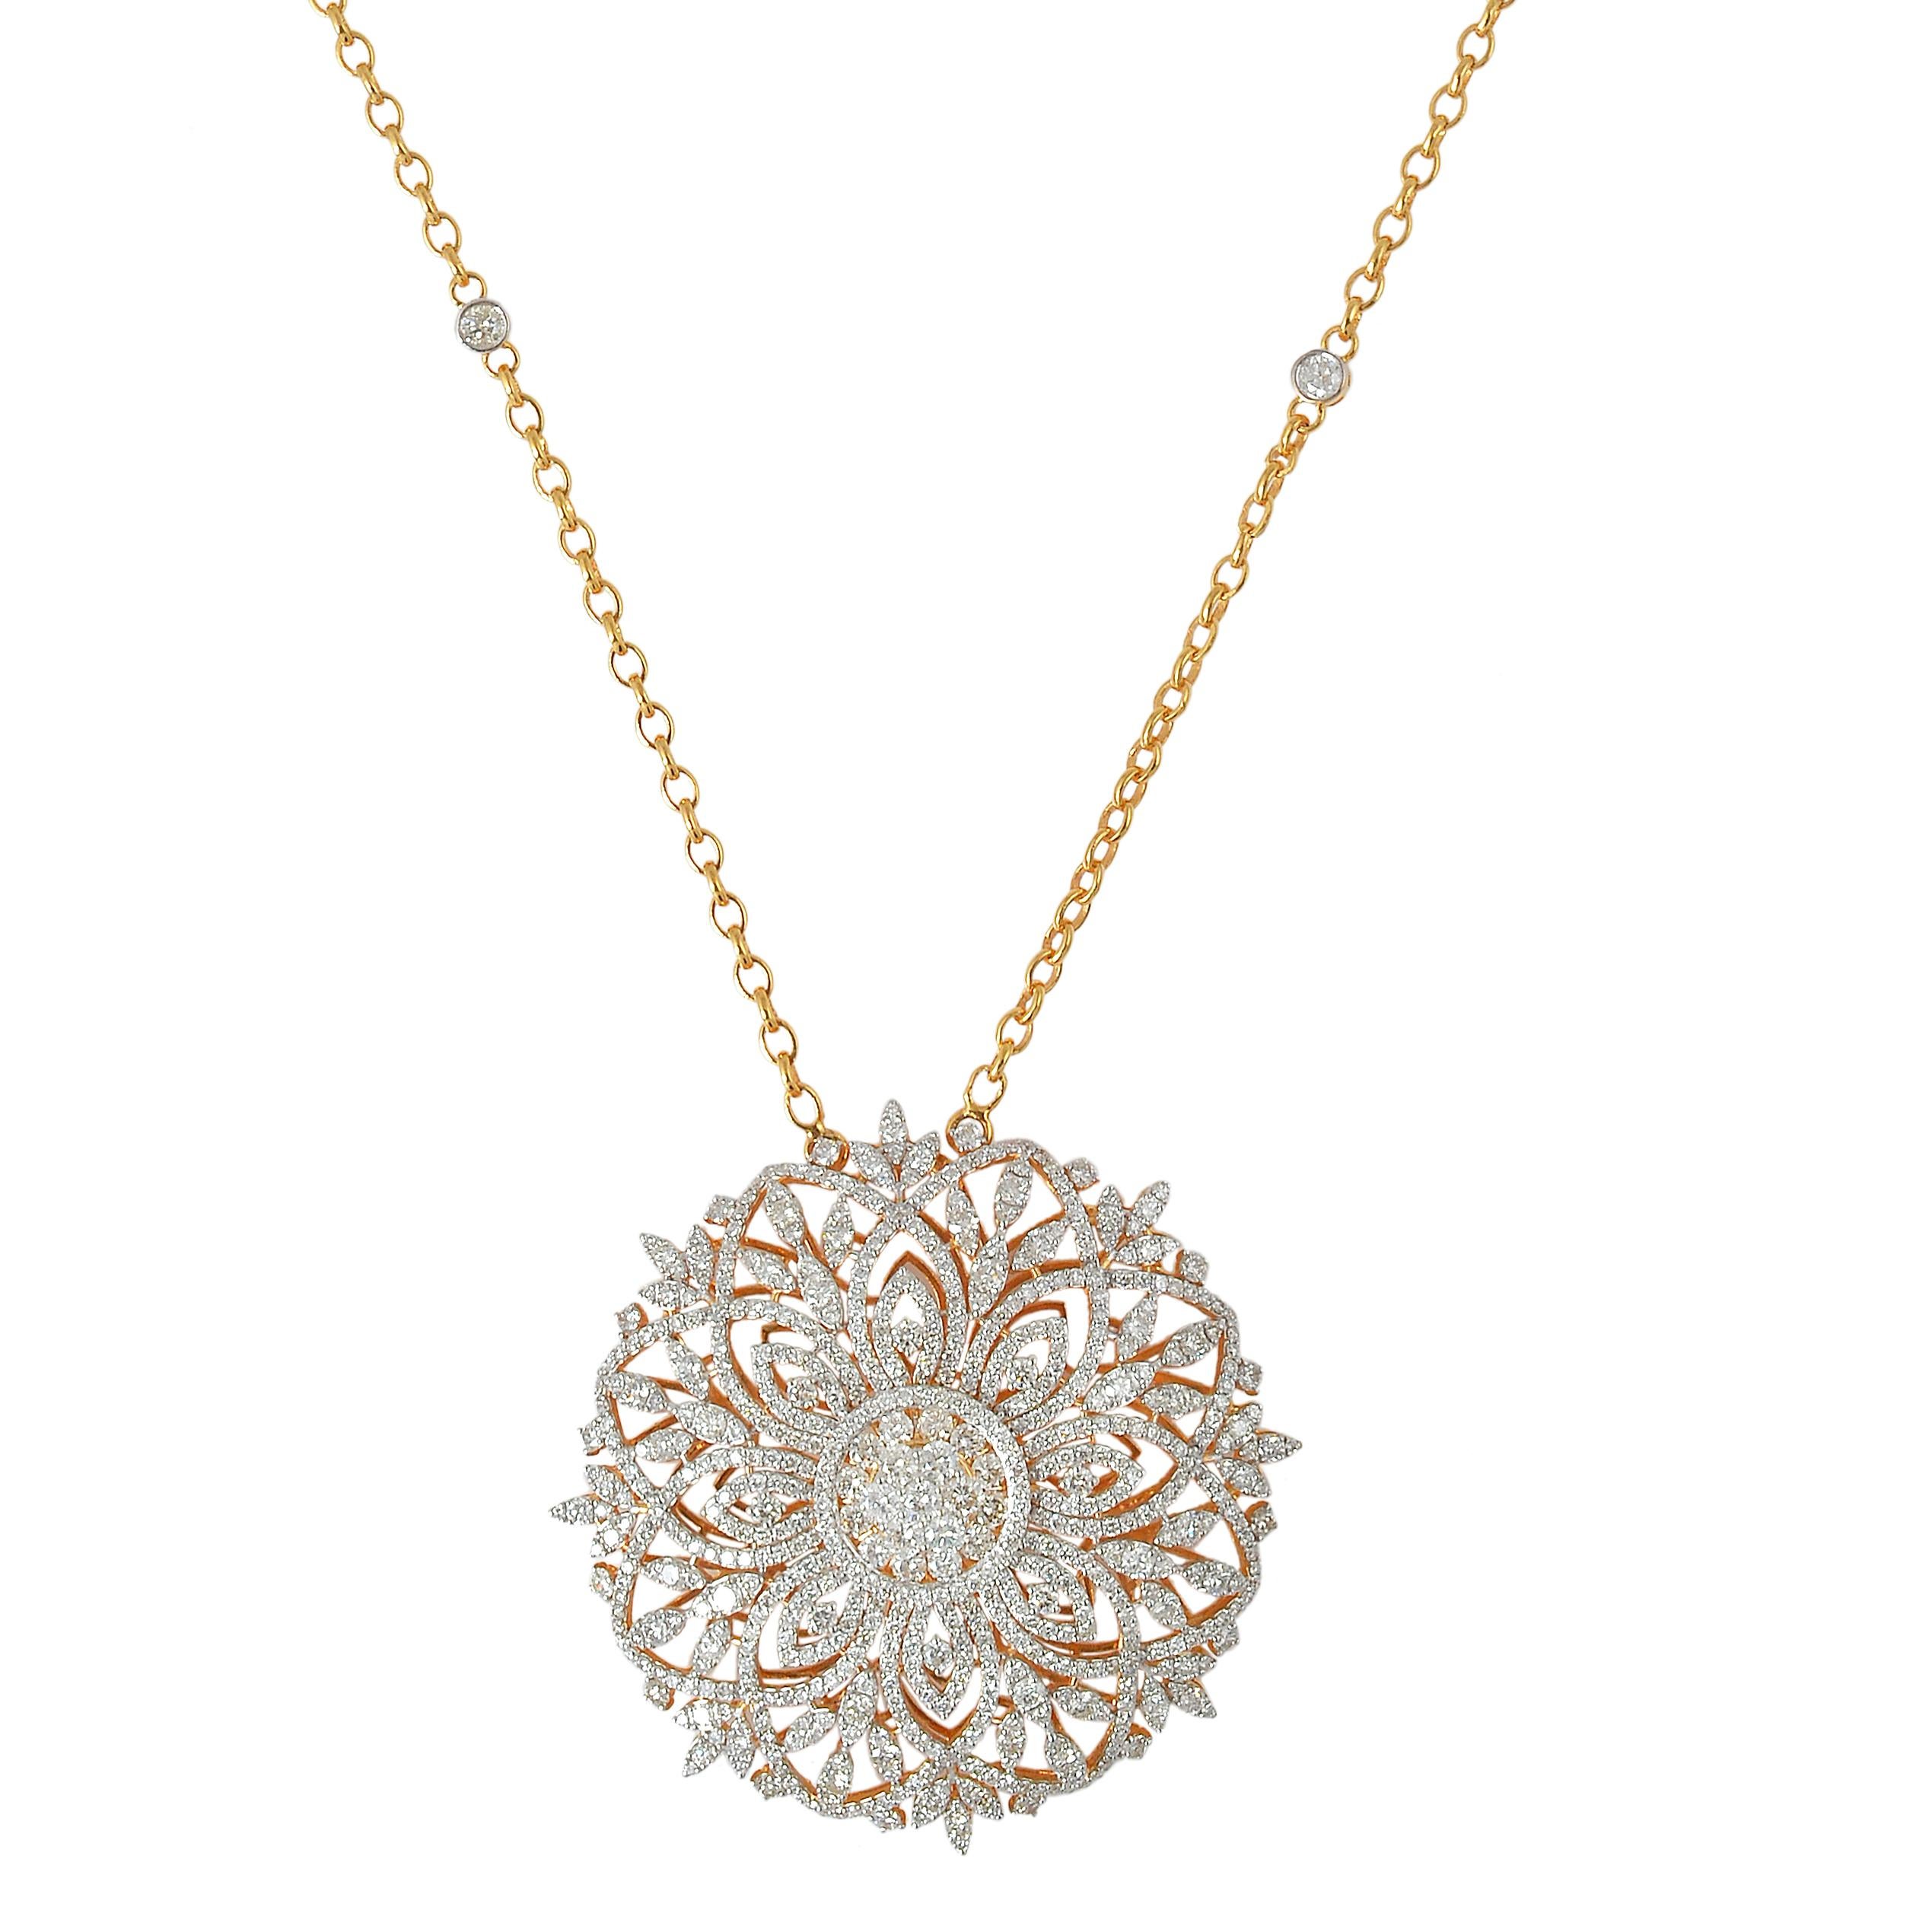 At the center of this pendant necklace blooms a stunning flower motif, adorned with a collection of brilliant round-cut diamonds. The diamonds, with a total weight of 12.15 carats, showcase SI clarity and HI color, ensuring remarkable sparkle and